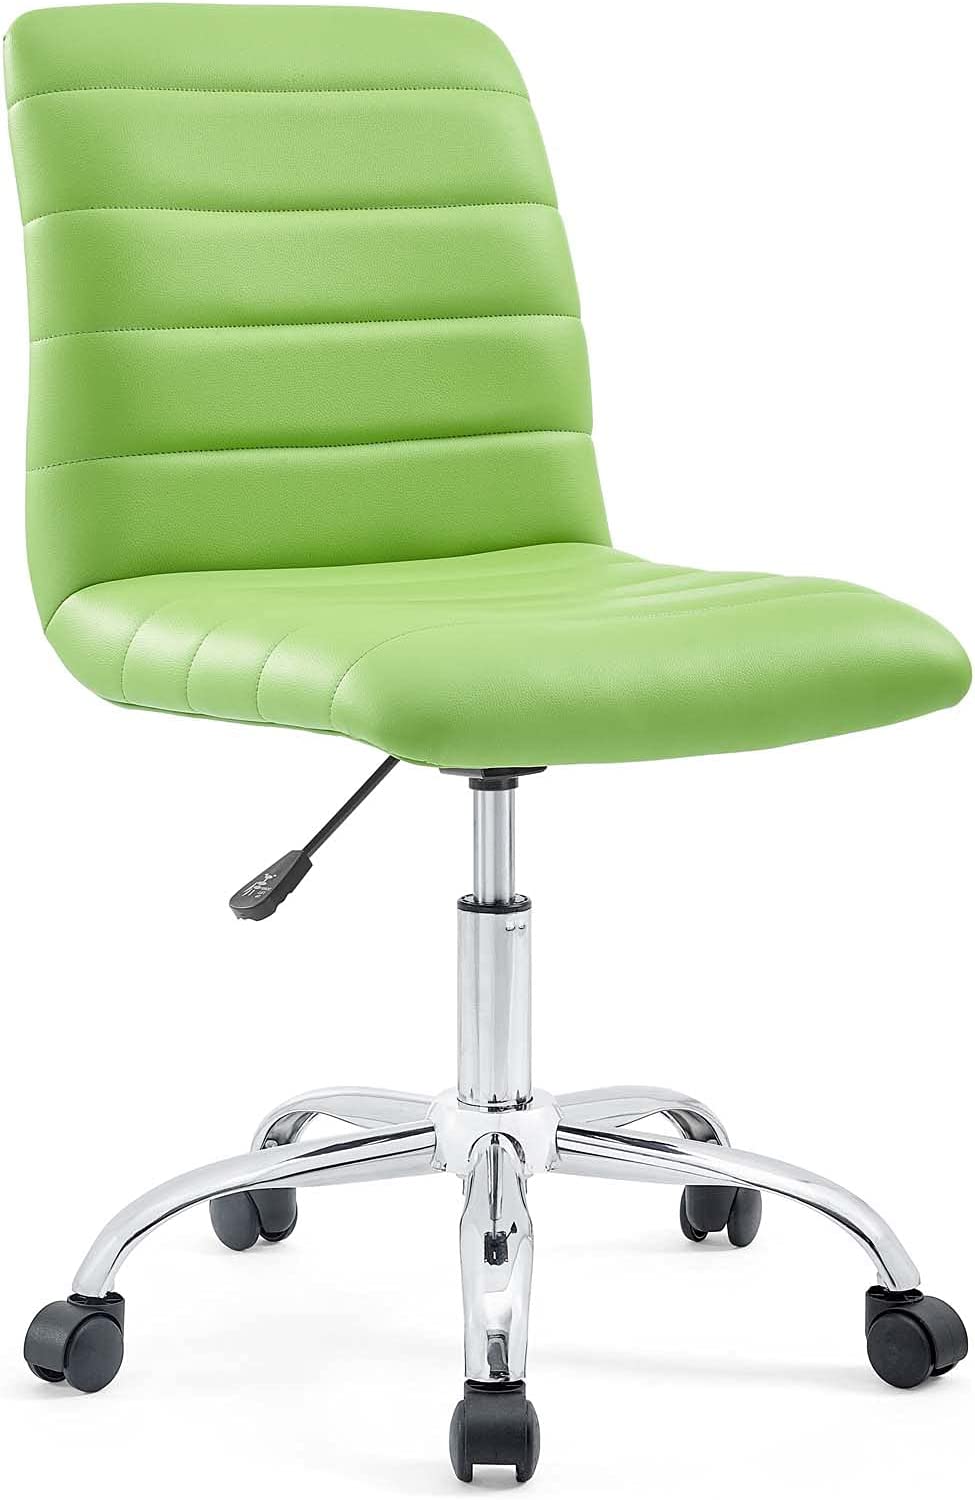 Modway Ripple Ribbed Armless Mid Back Swivel Computer Desk Office Chair In Bright Green